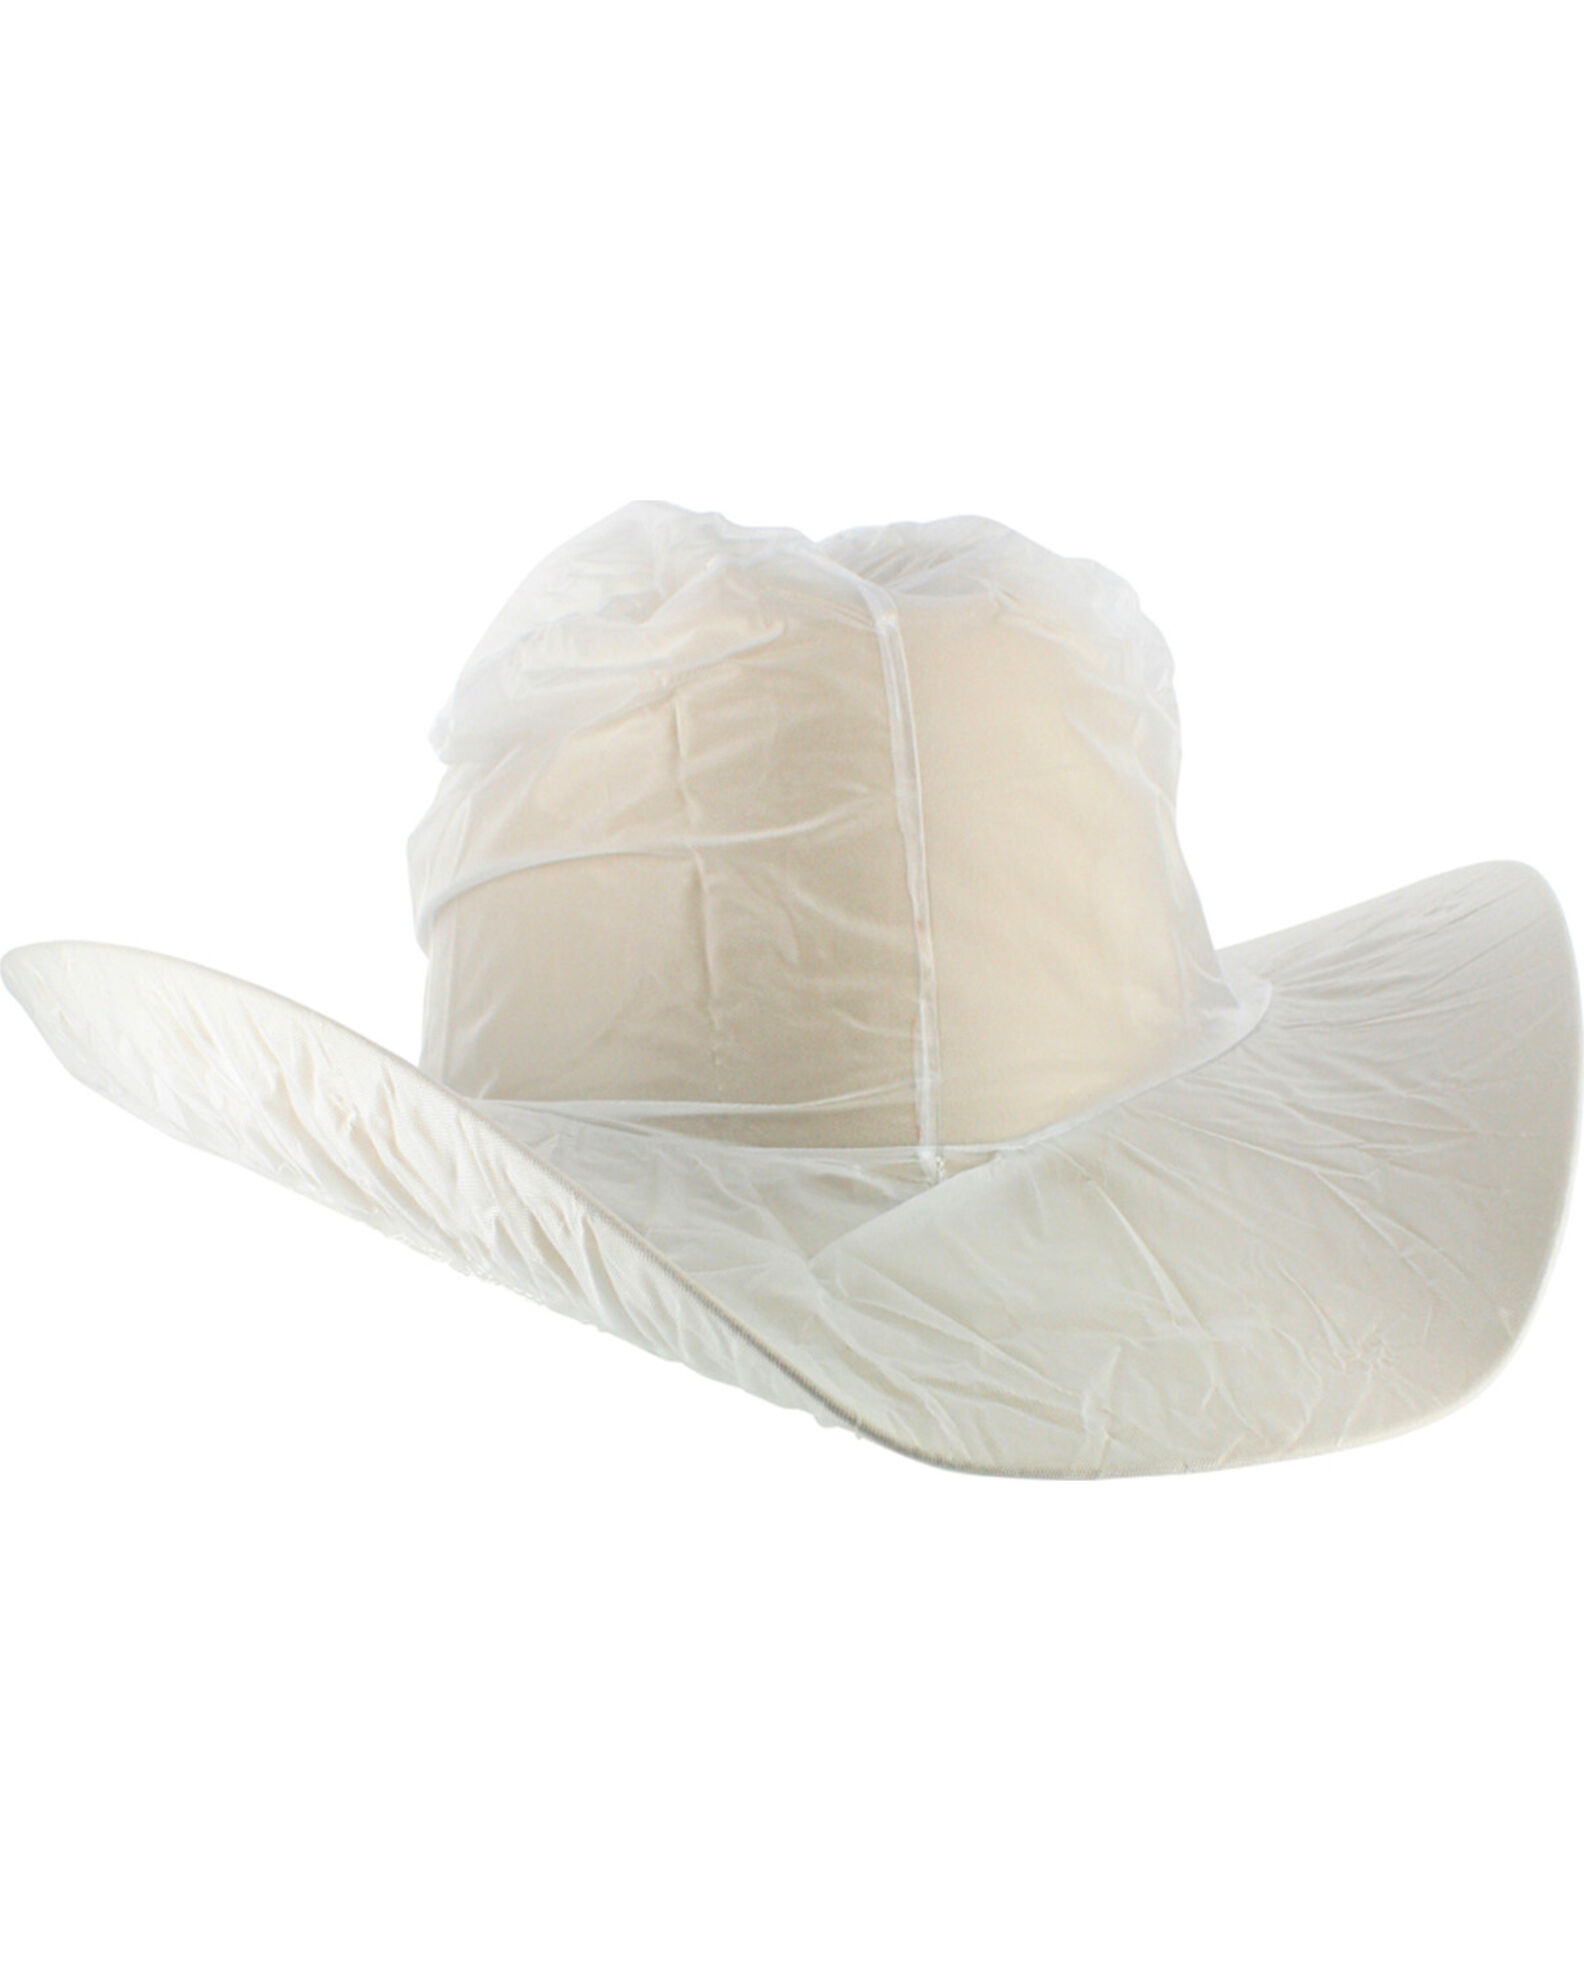 Product Name: Boot Barn® Hat Protector